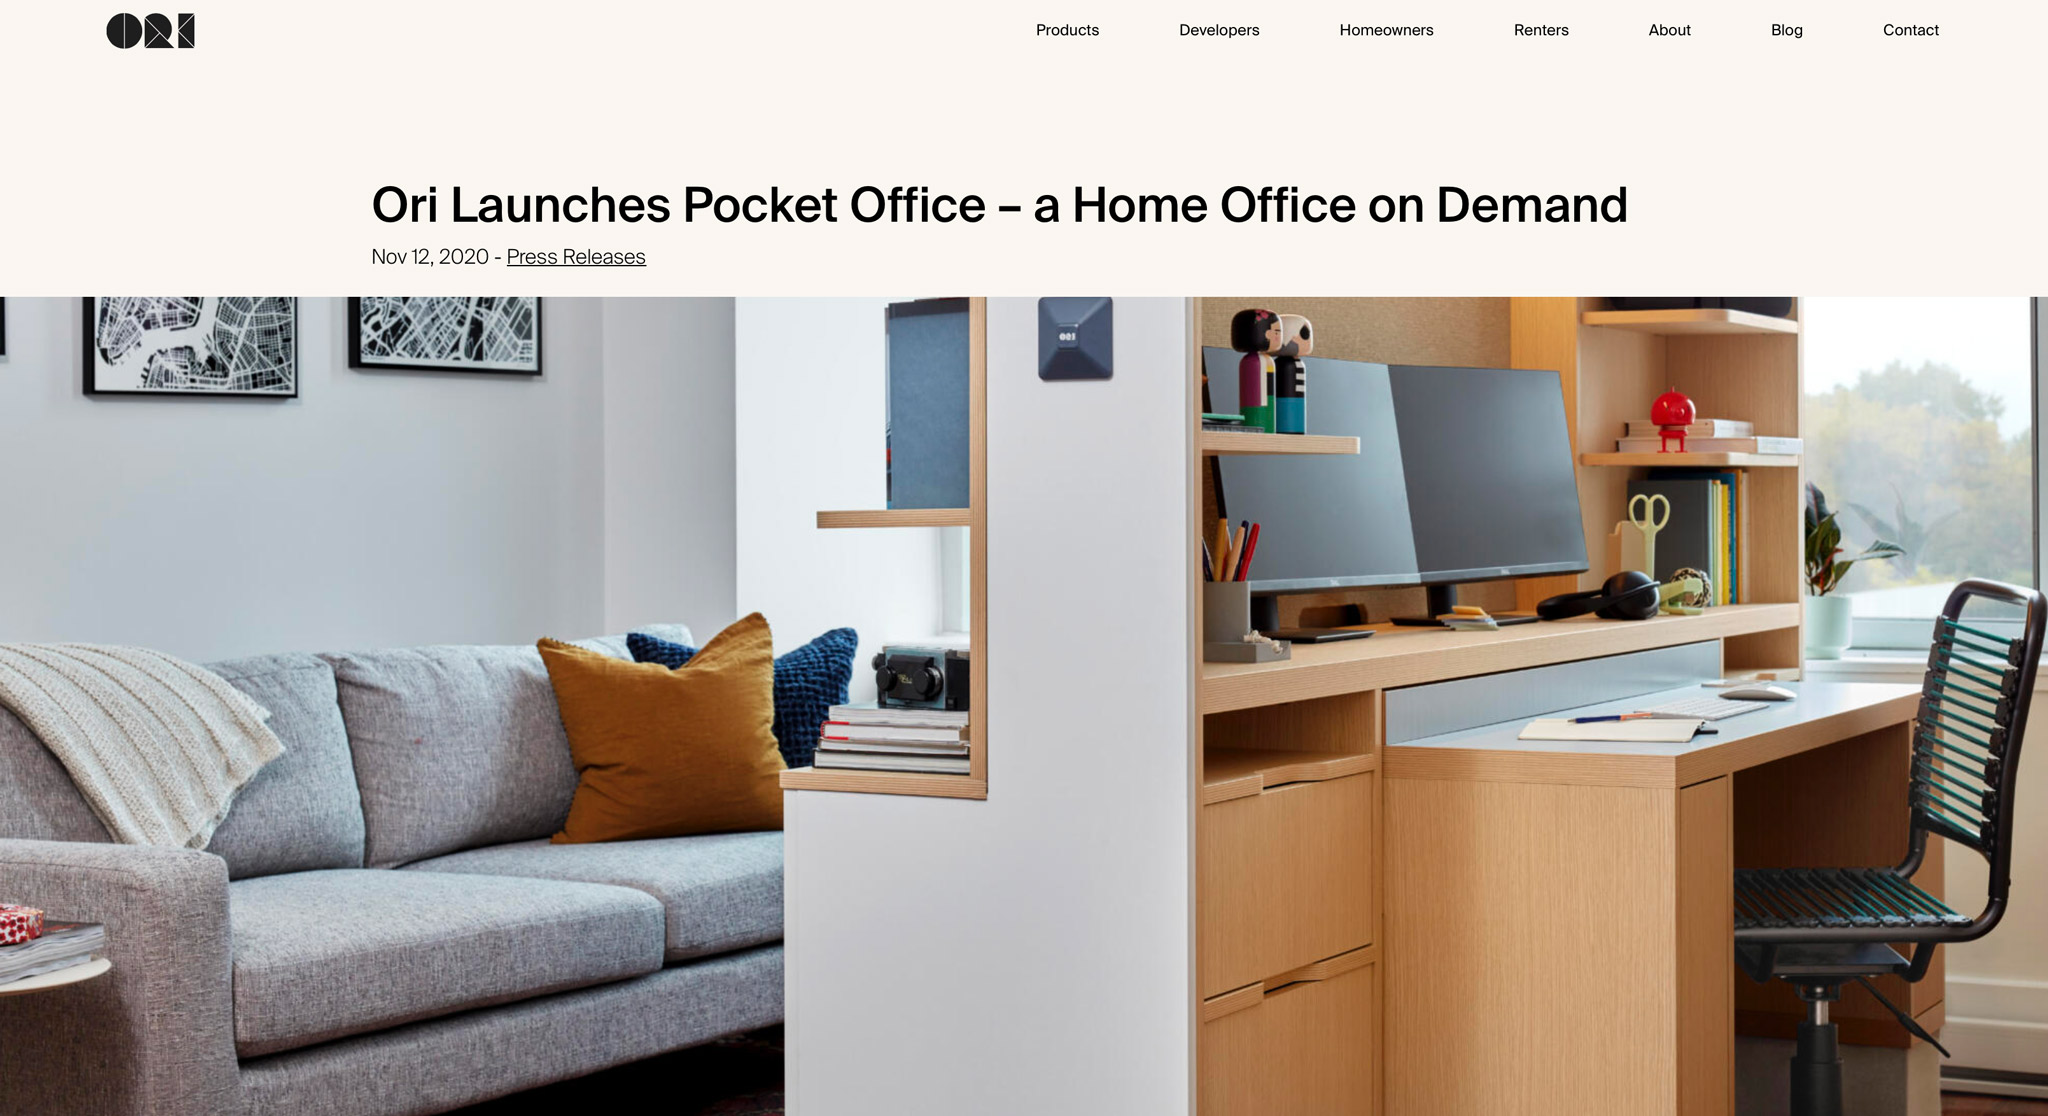 Ori Launches Pocket Office